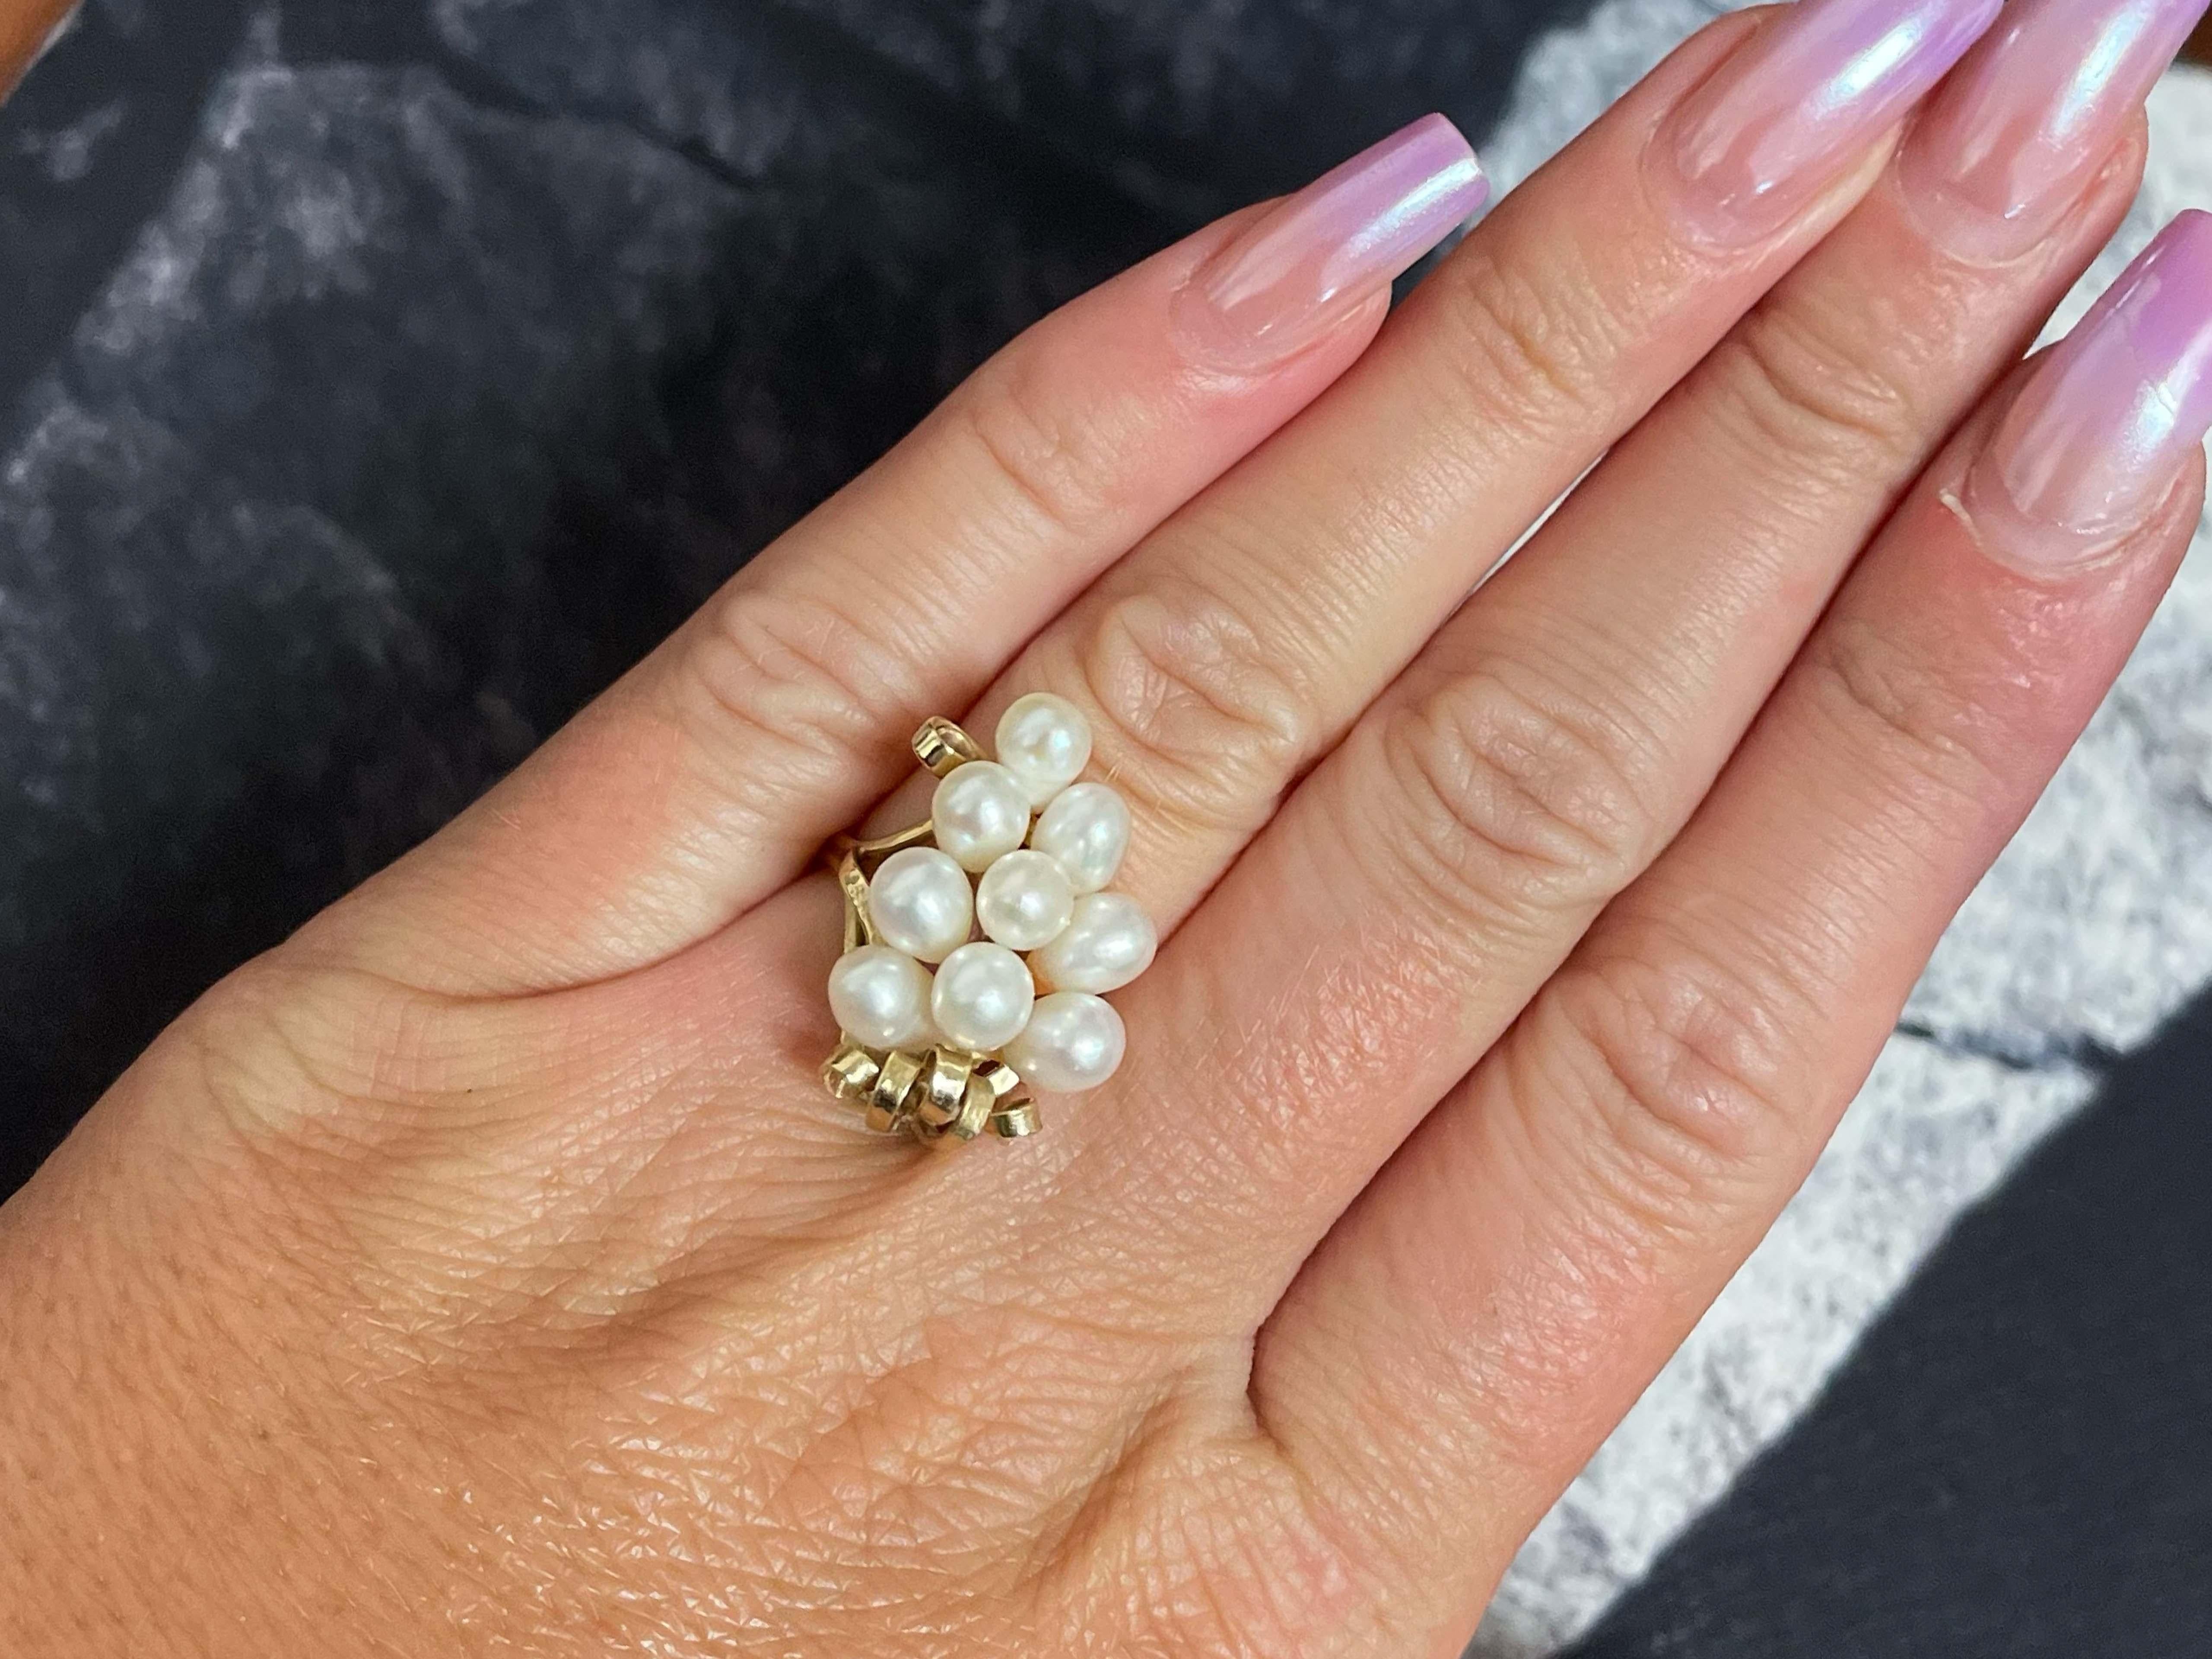 Ring Specifications:

Designer: Ming's

Metal: 14k Yellow Gold

Total Weight: 5.7 Grams

Ring Size:  6 (resizable) please message us to resize BEFORE purchasing

Stamped: 